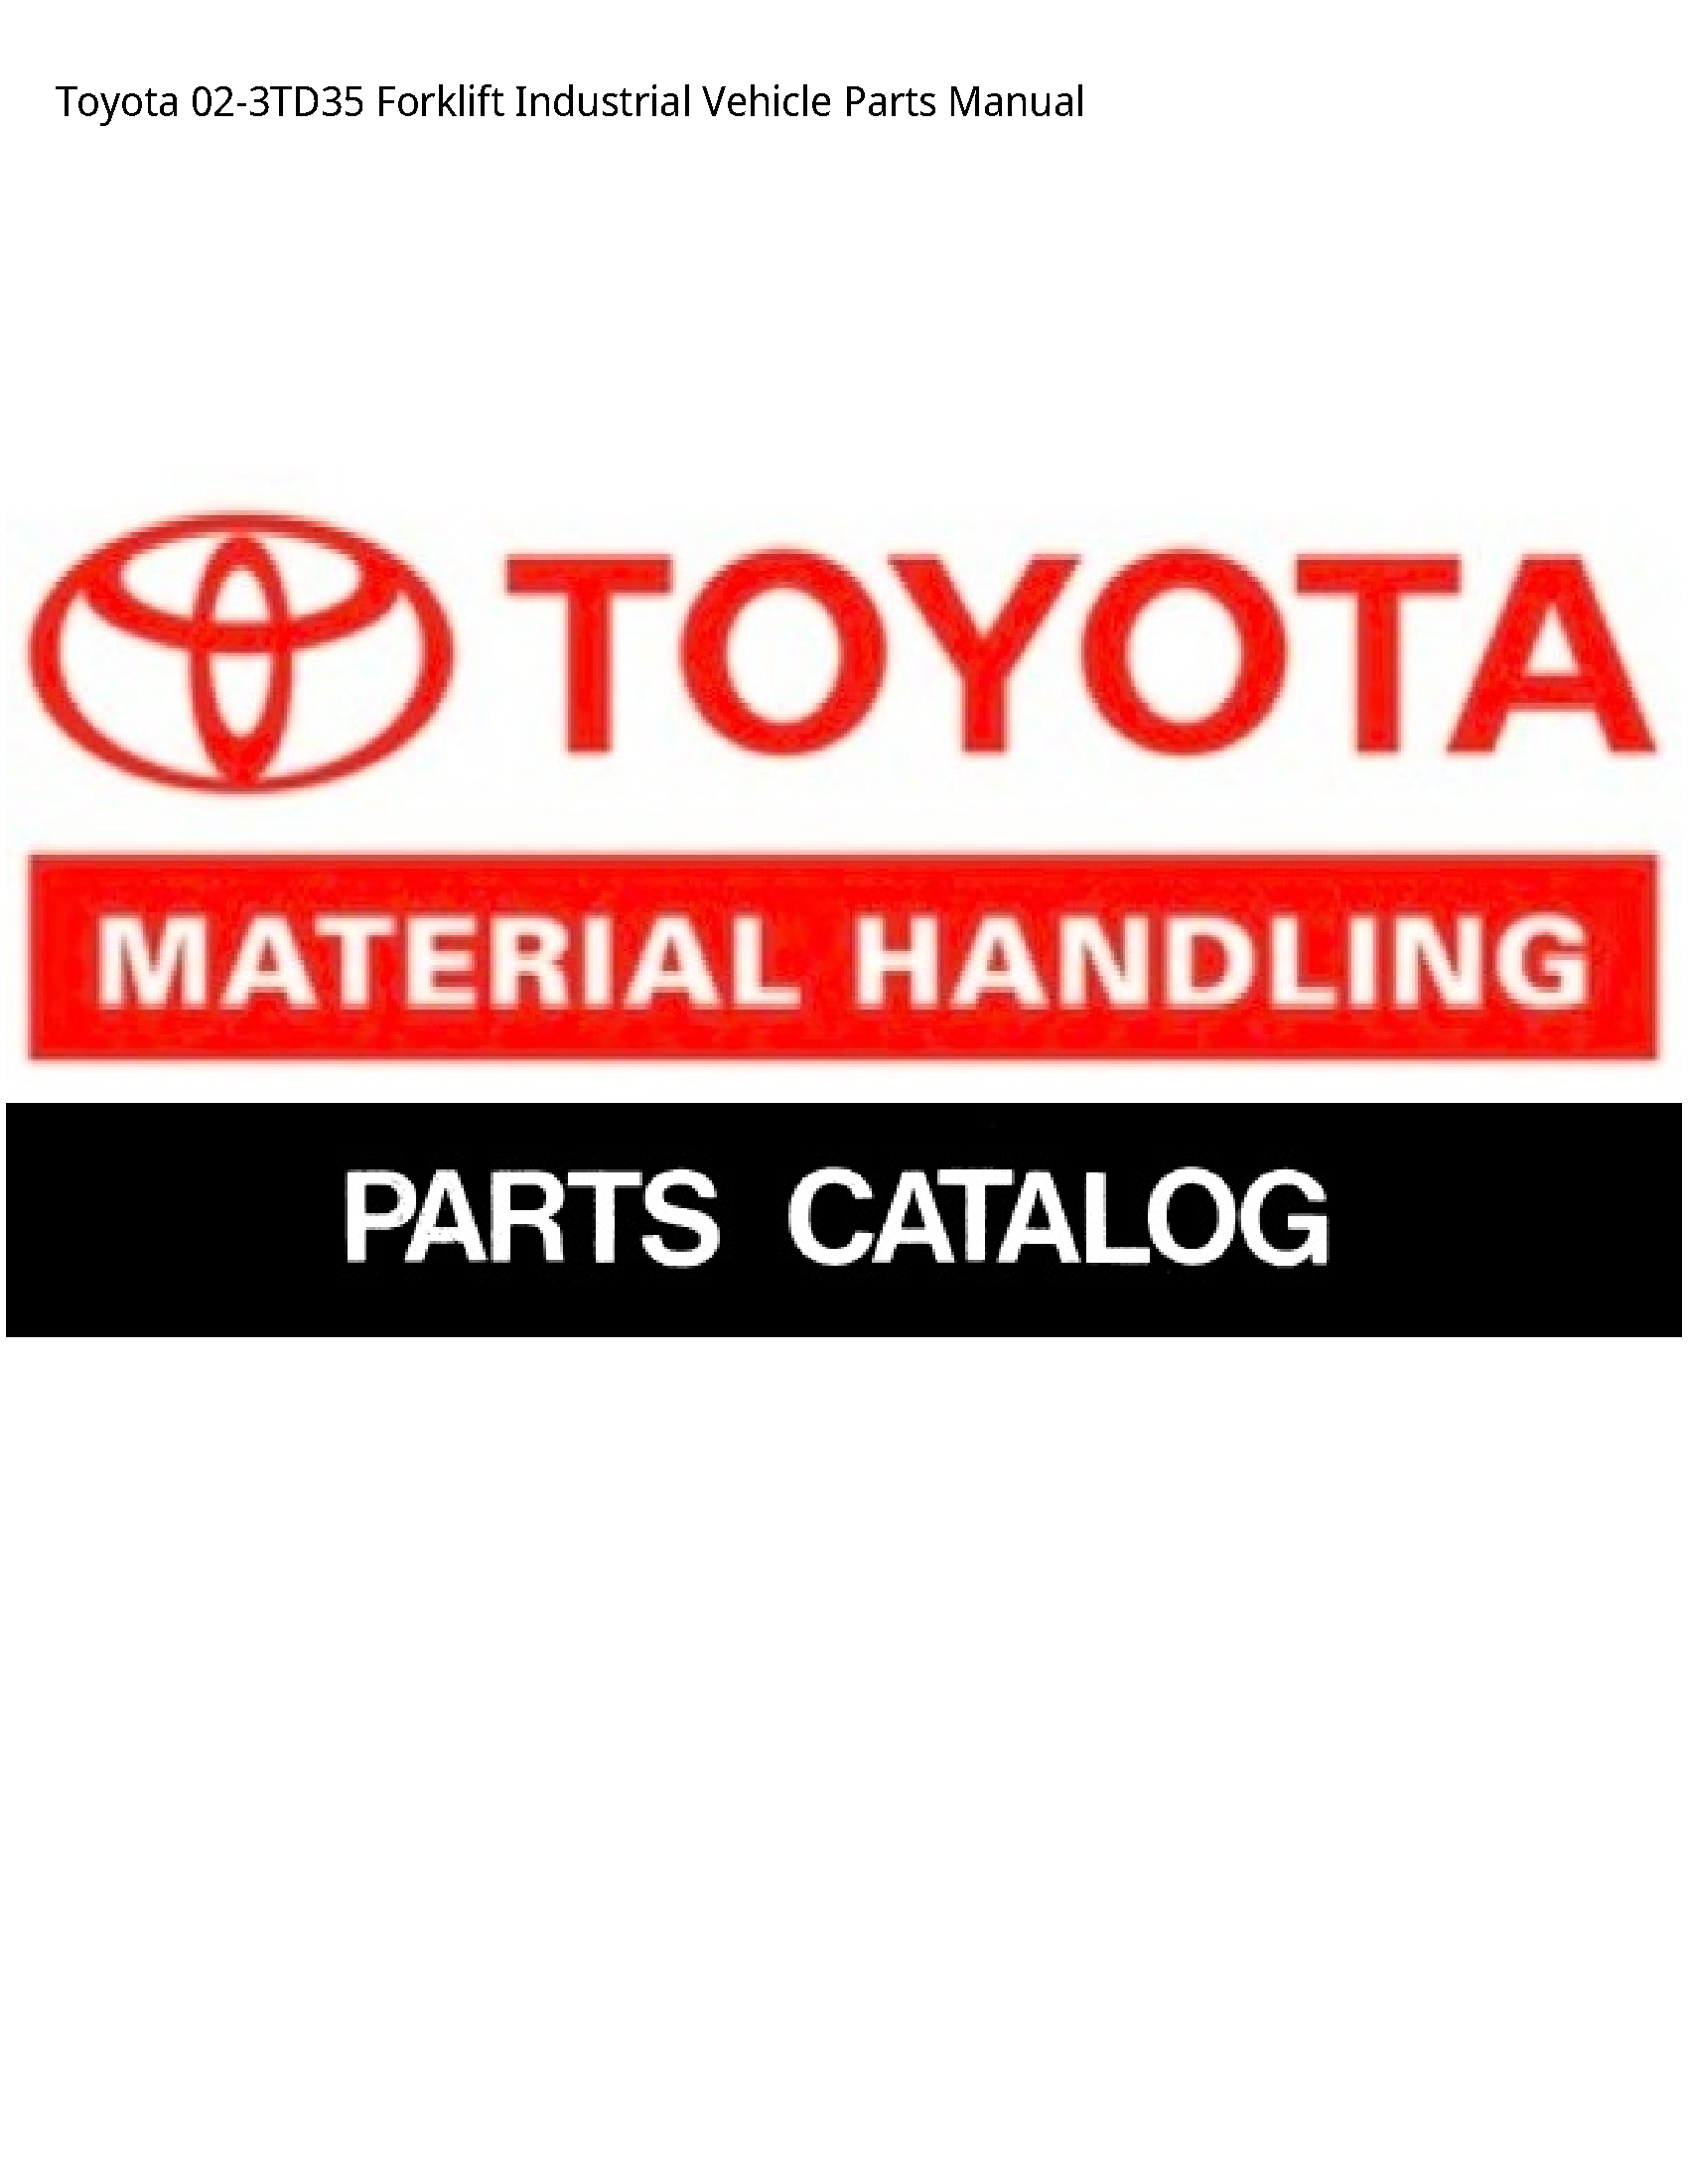 Toyota 02-3TD35 Forklift Industrial Vehicle Parts manual